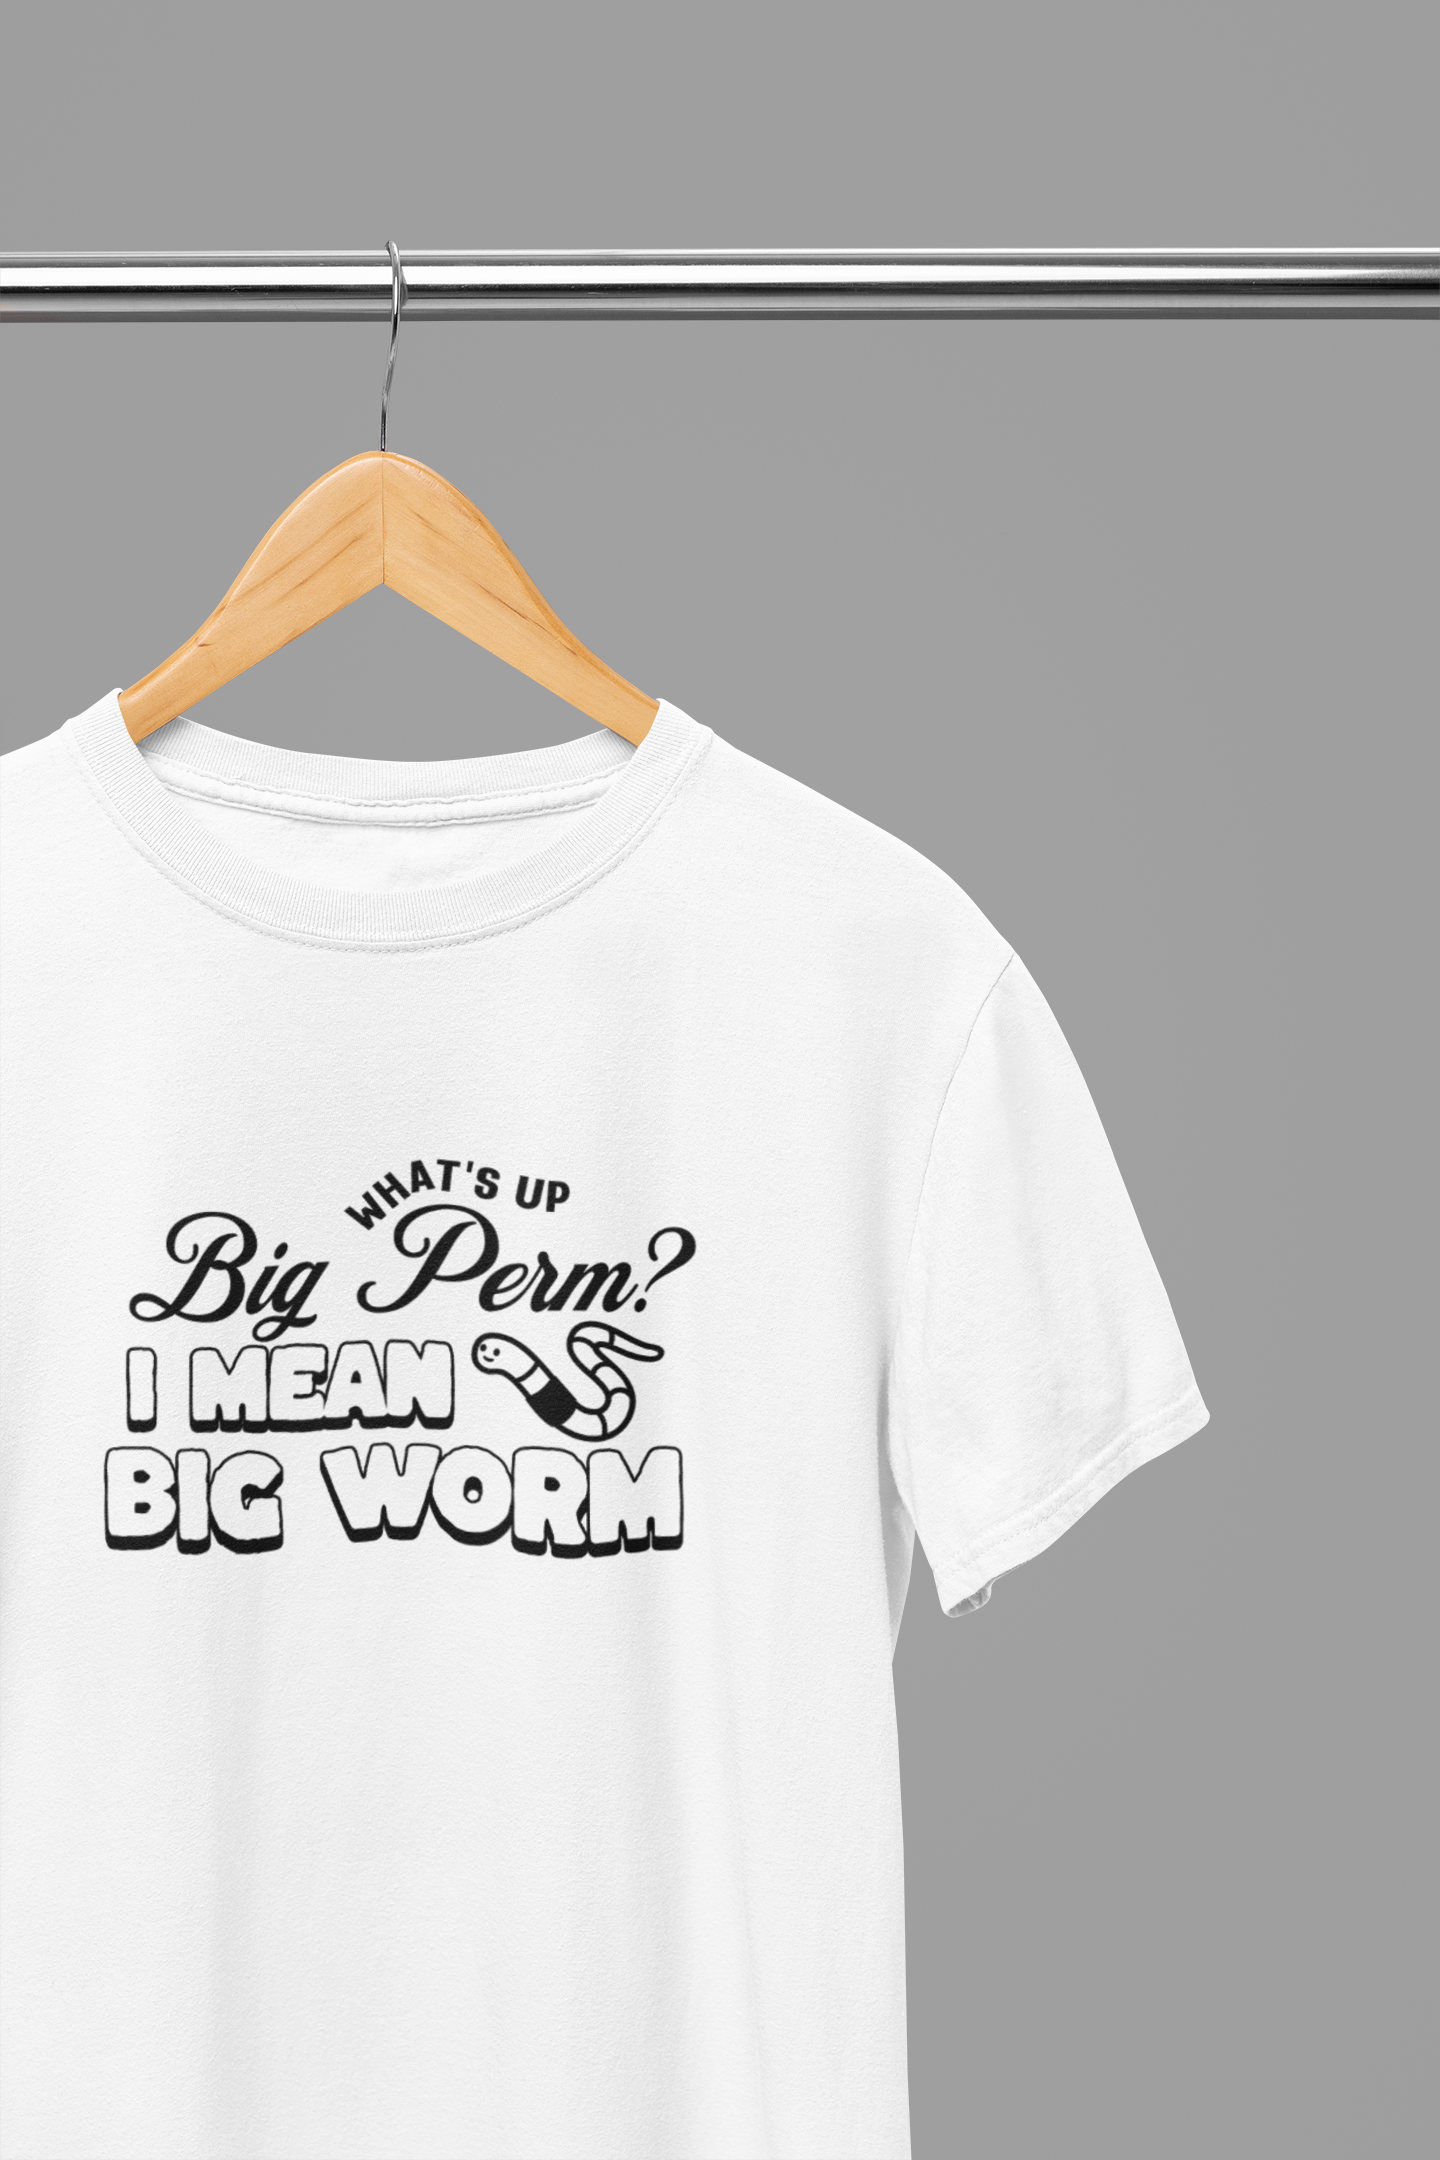 Big Worm Quote Friday Movie T-Shirt